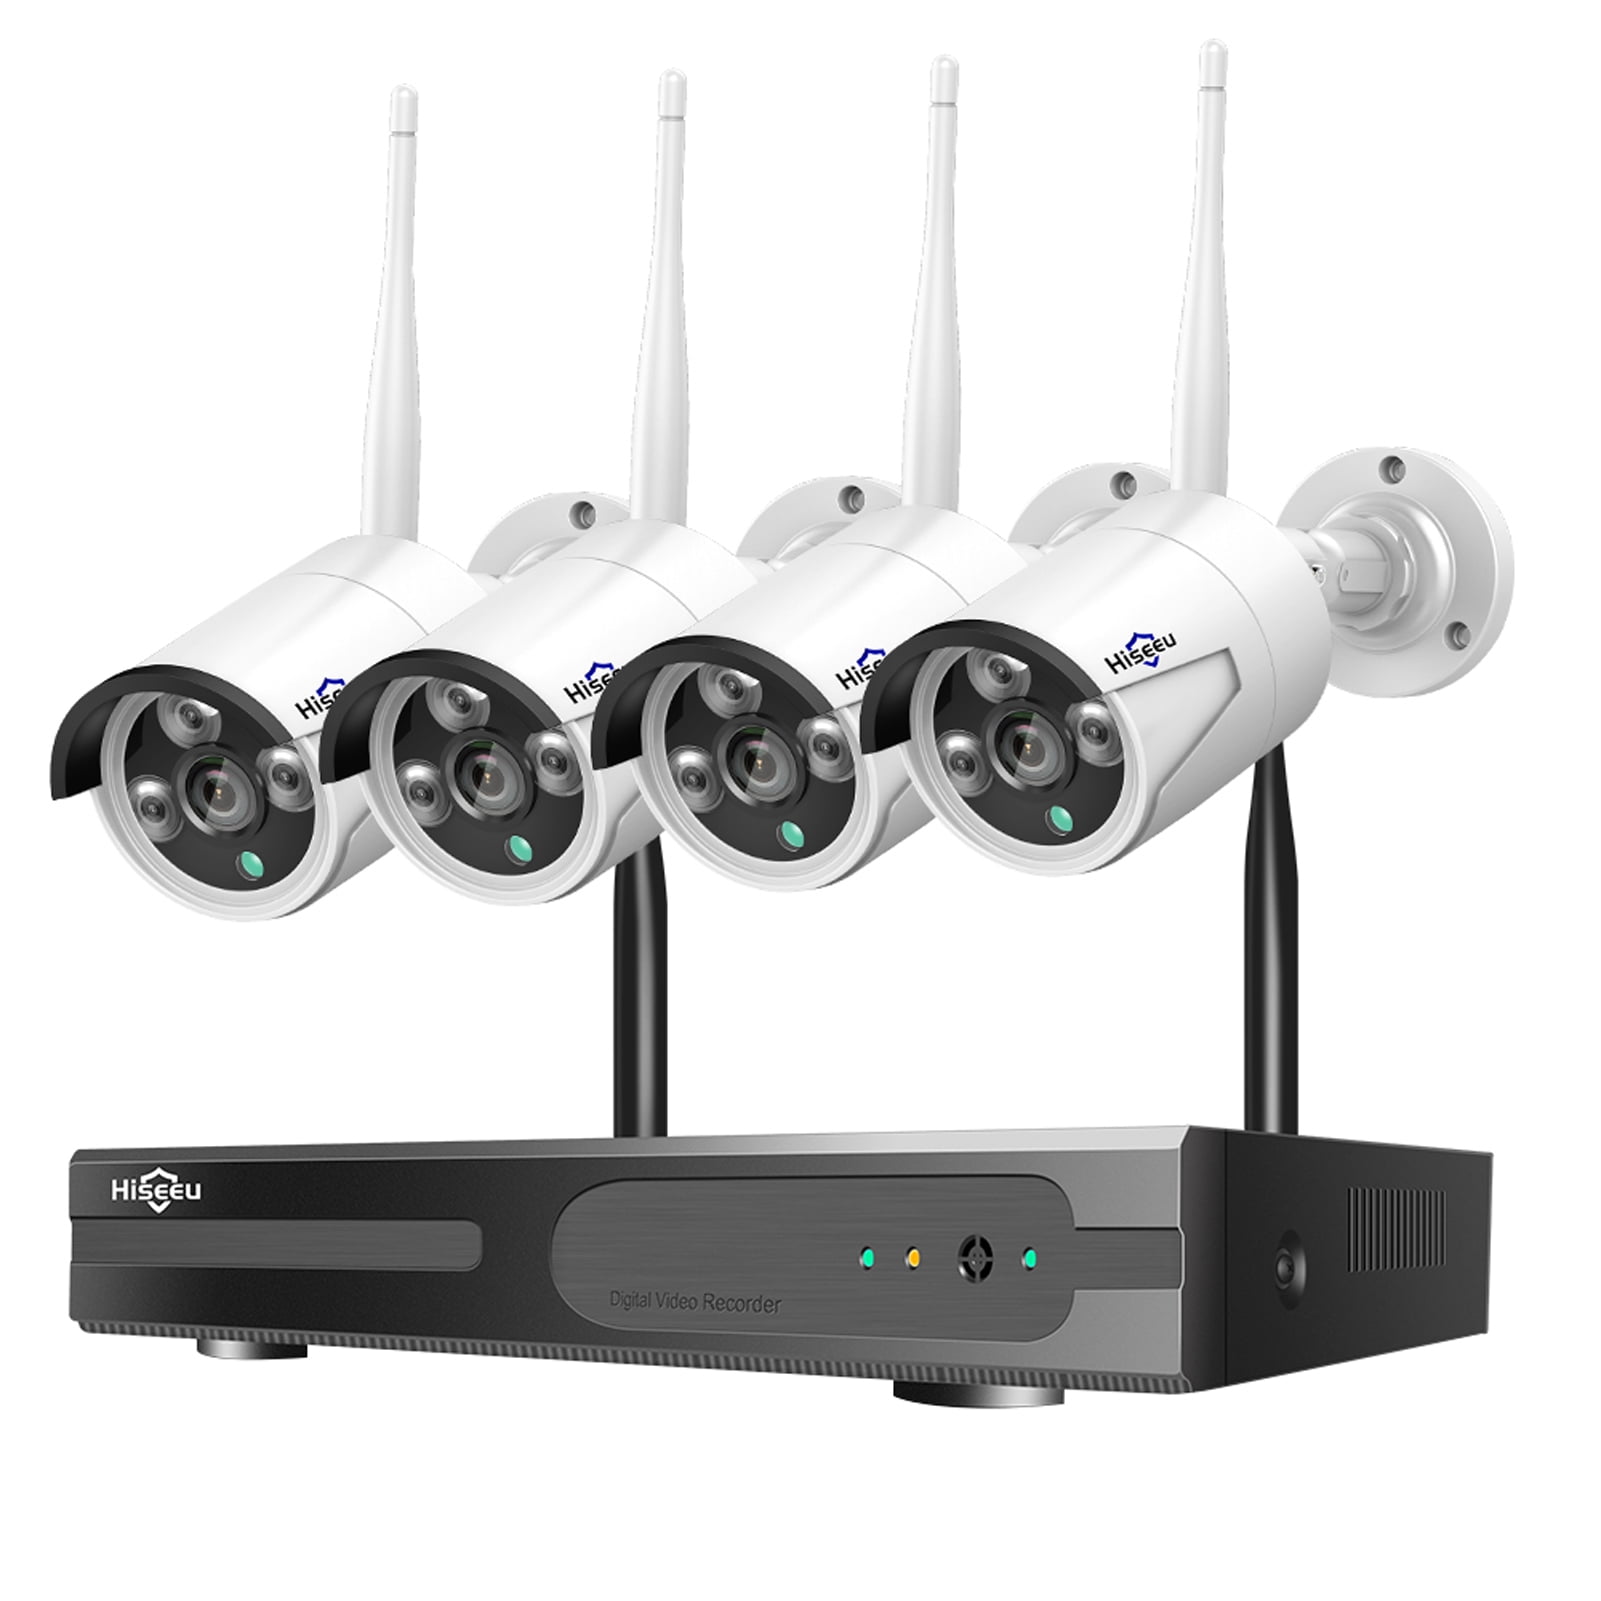 【3TB Hard Drive,Audio】 SMONET 3MP Wireless Security Camera System,8CH Indoor Outdoor Video Surveillance NVR Systems,8Pcs 1296P Home WiFi IP Cameras,P2P,Waterproof,Night Vision,Remote Access 